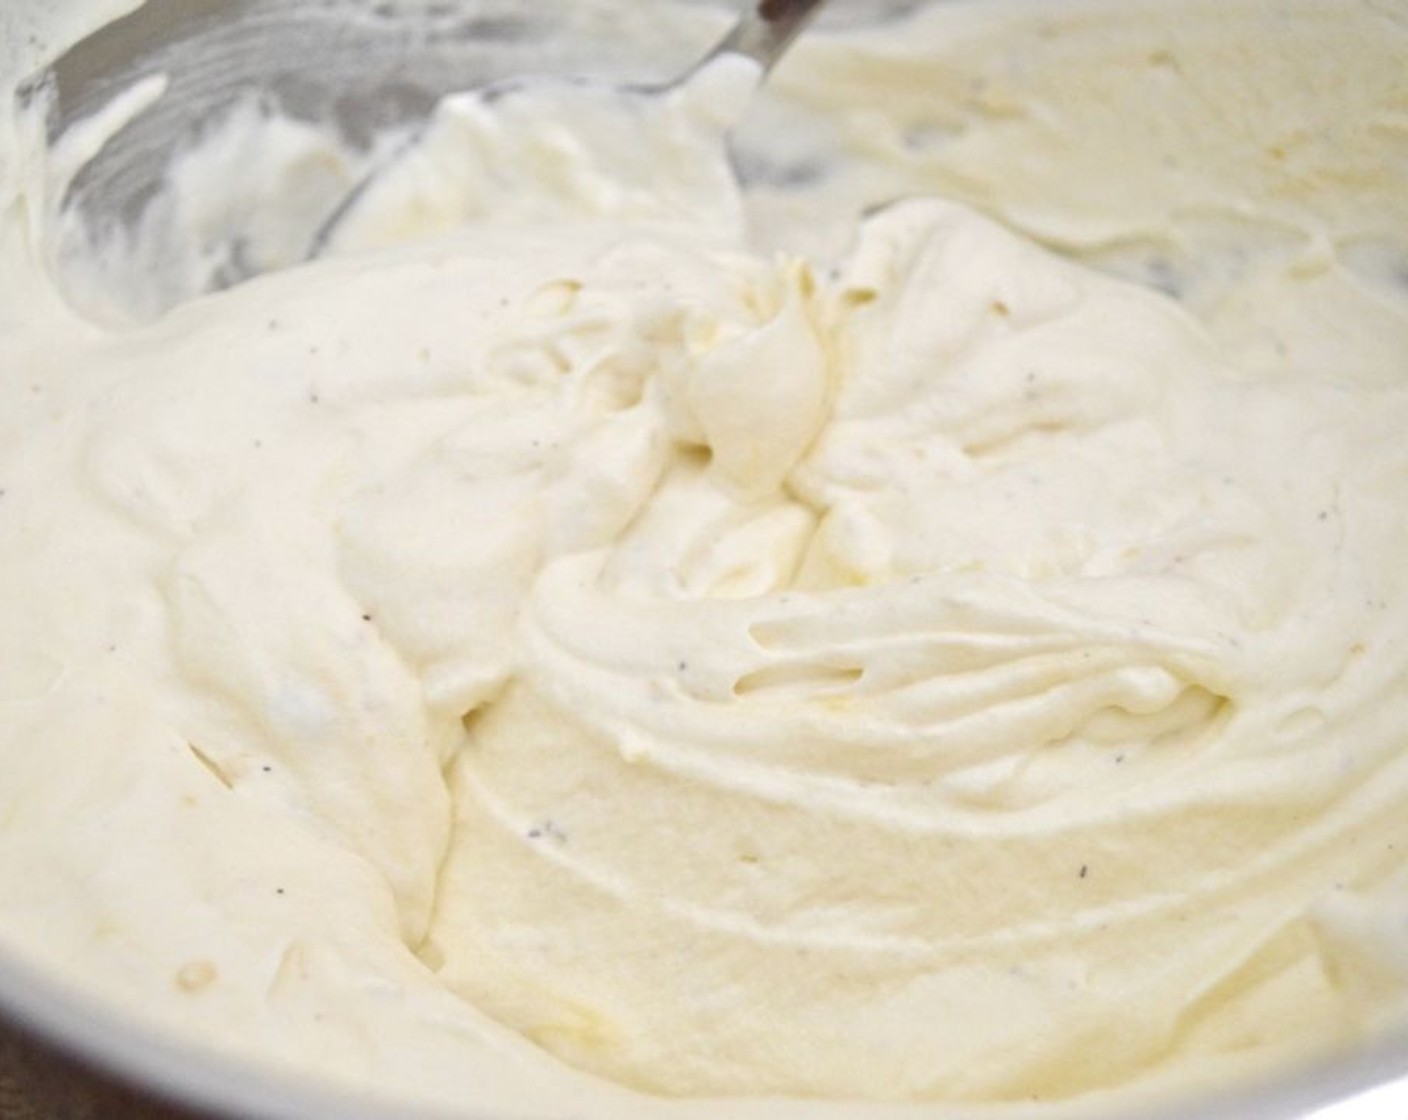 step 9 Whip up the Heavy Cream (1 cup) in a bowl with a hand mixer until it keeps stiff peaks. Stir in the Lemon Curd (3 Tbsp), Zest of the Lemon (1/2), and Ground Lavender (1/2 tsp).